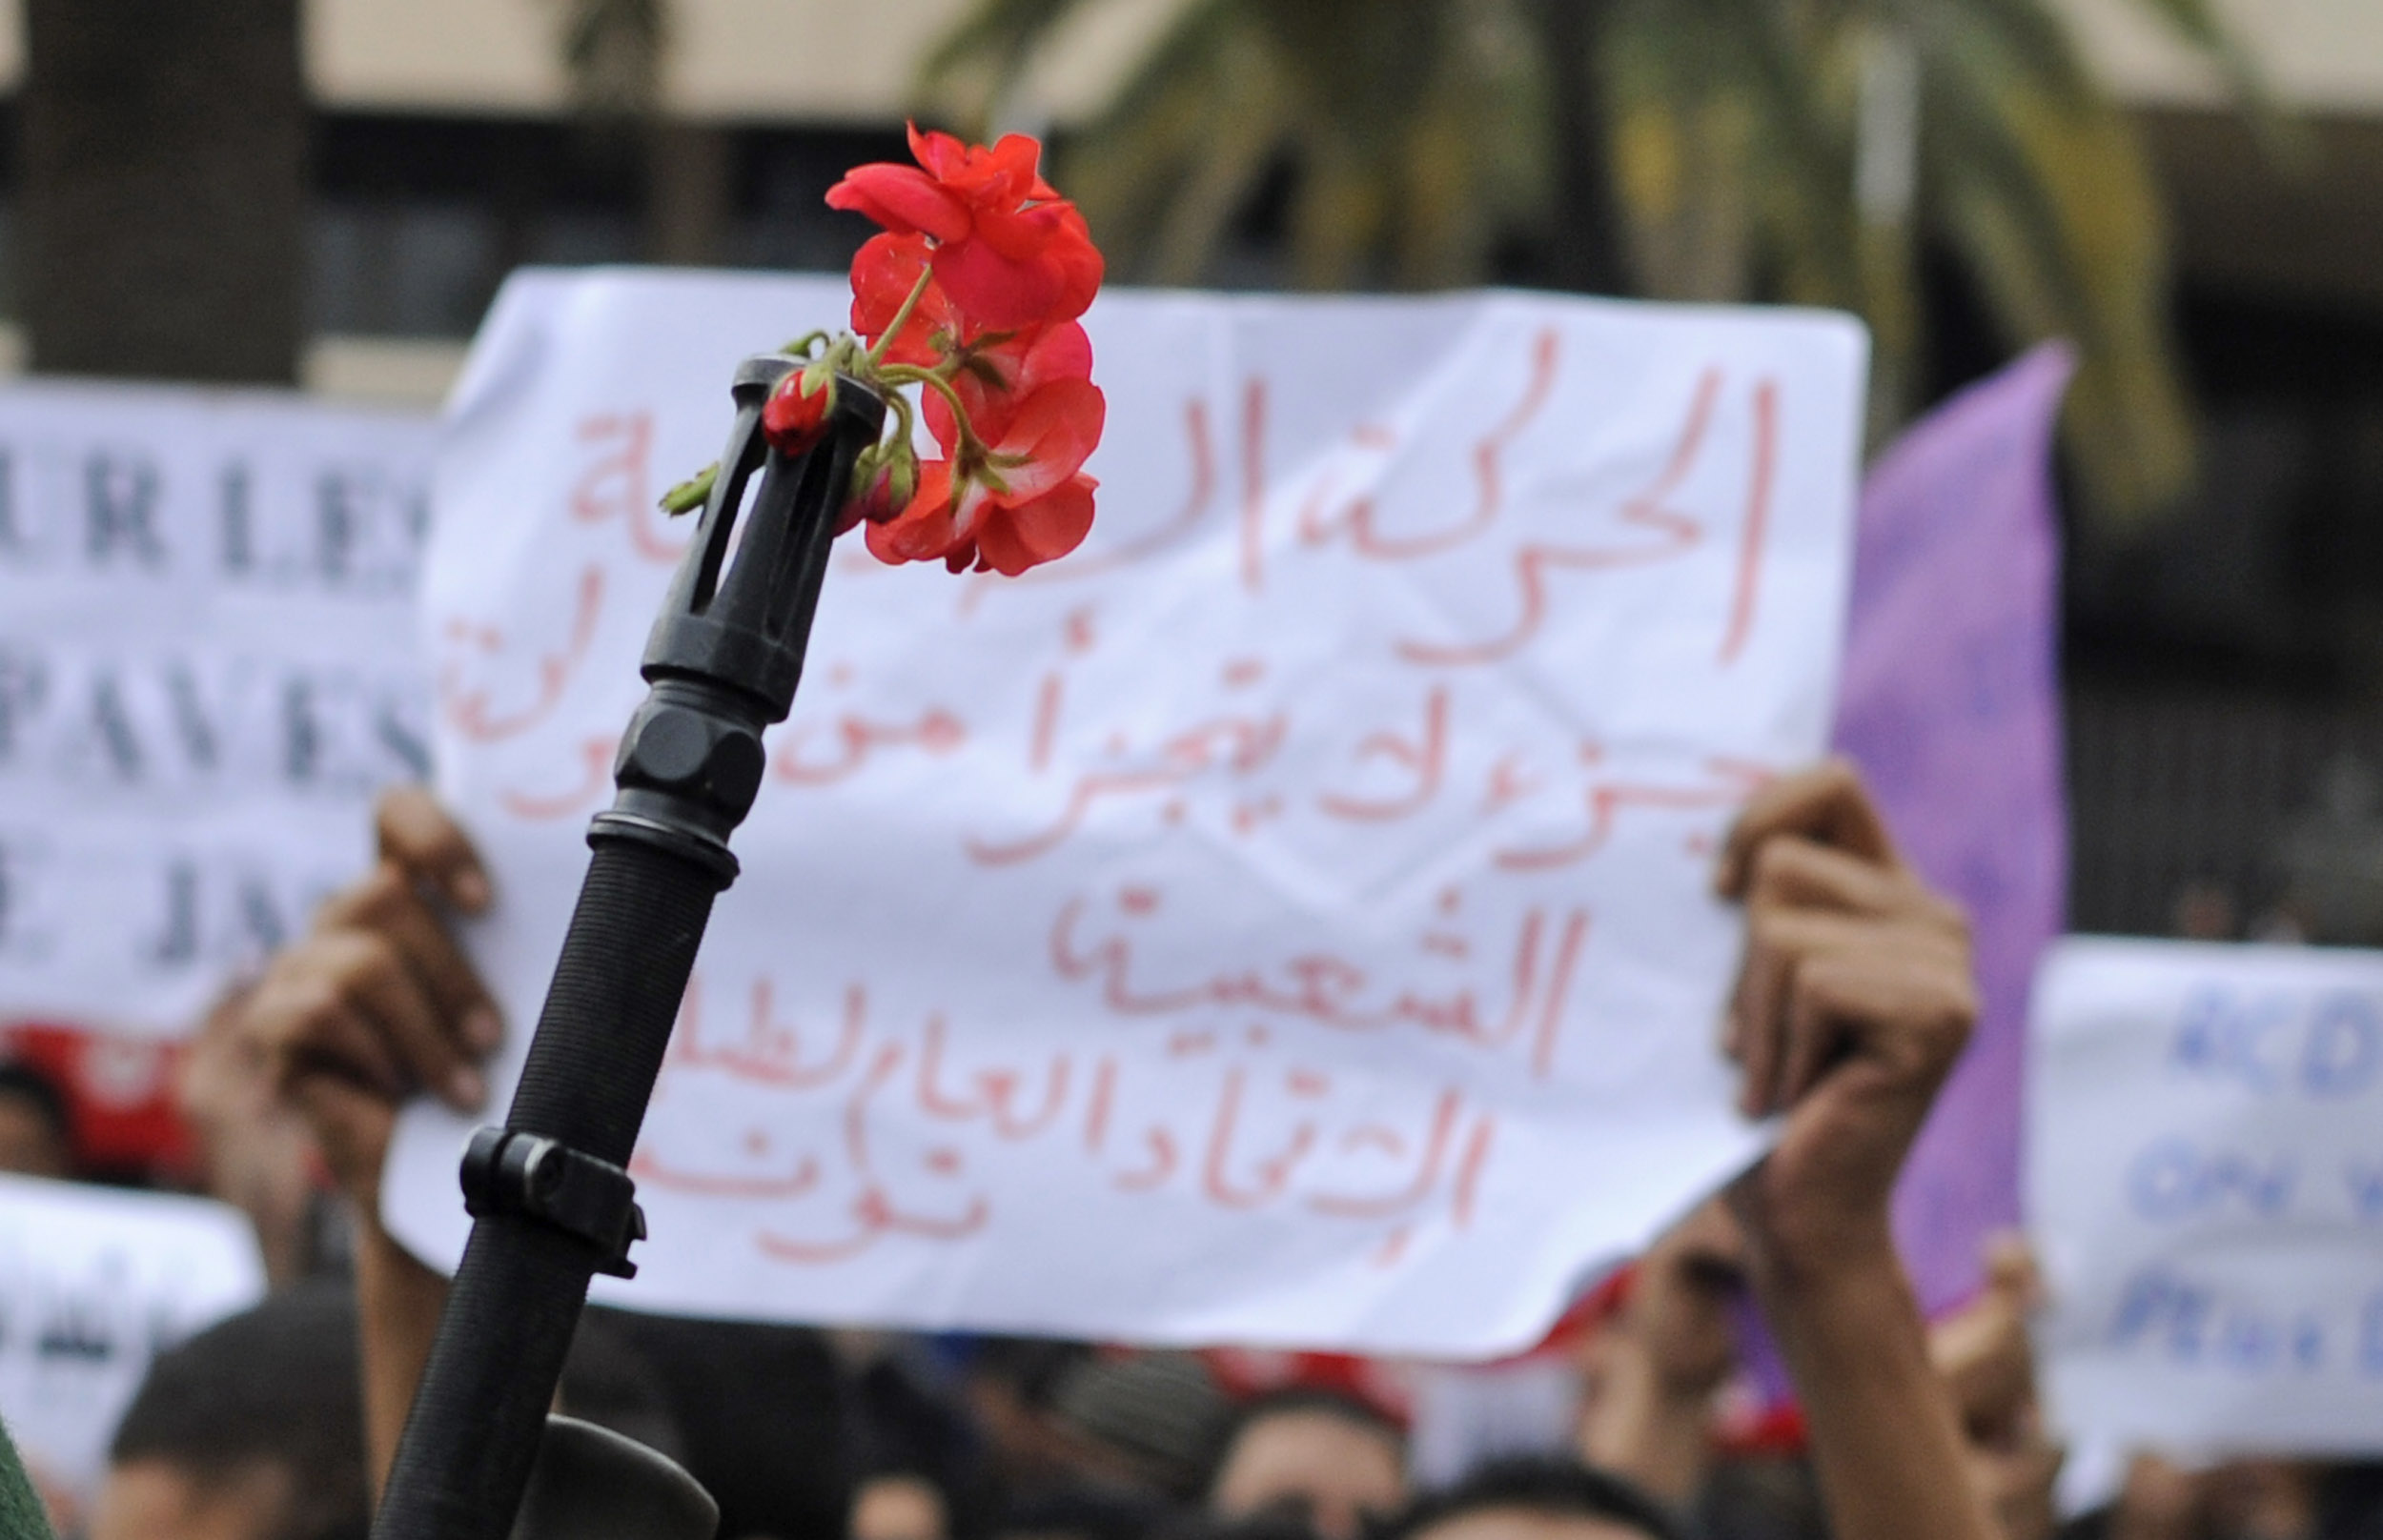 Peaceful protesters put flowers in the barrels of army soldiers' guns who were earlier shooting in the air to deter them from storming into an official building, Tunis, Tunisia, 20 January 2011. Reuters.